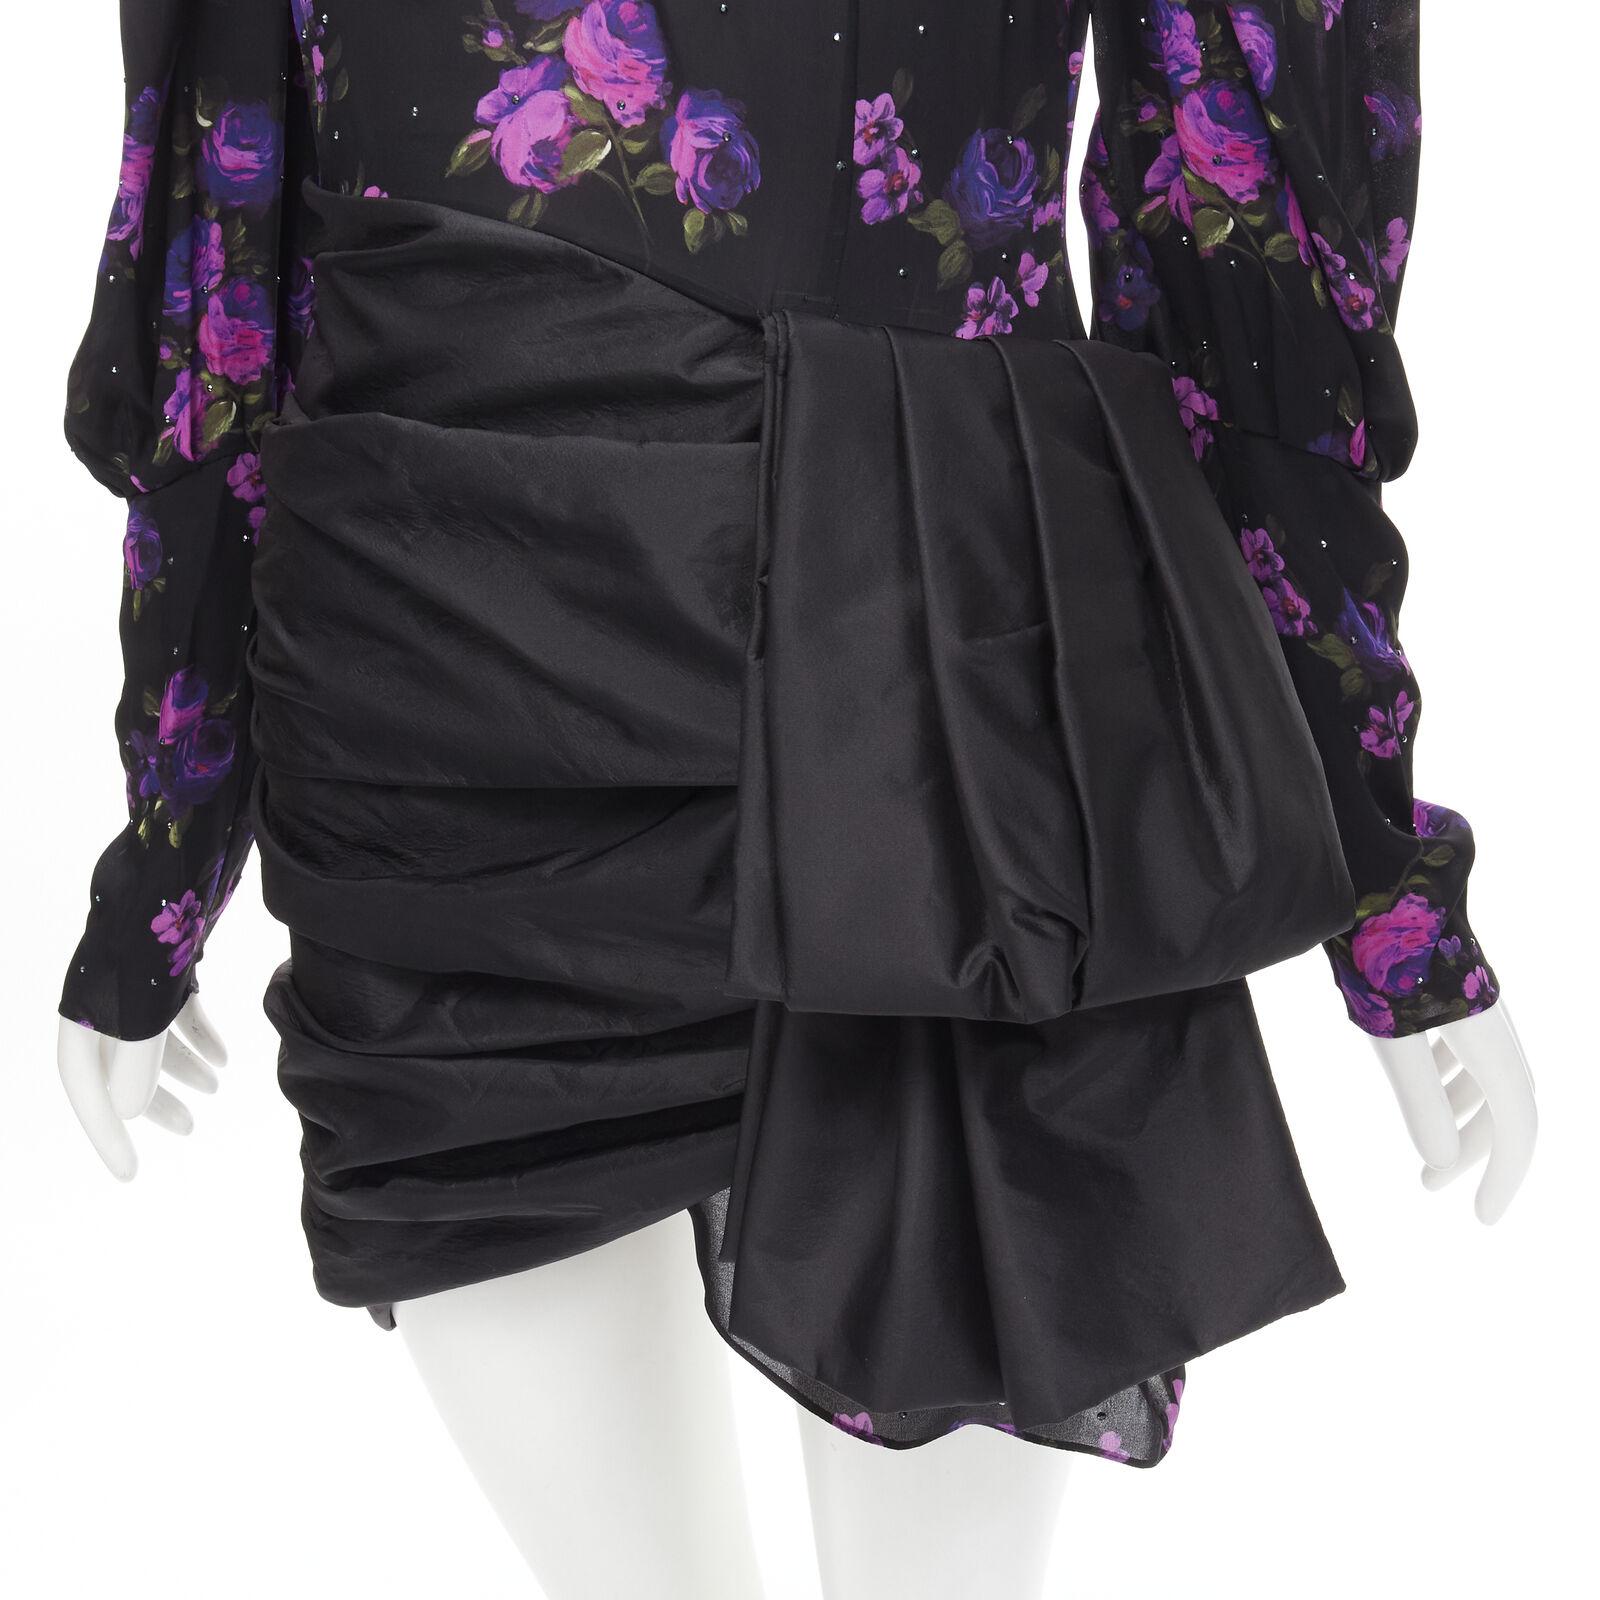 MAGDA BUTRYM Matera crystal embellished purple floral wrap skirt dress FR34 XS
Reference: AAWC/A00151
Brand: Magda Butrym
Model: Matera
As seen on: Tori Garrn, Julianne Hough
Material: 100% Silk
Color: Black, Purple
Pattern: Floral
Closure: